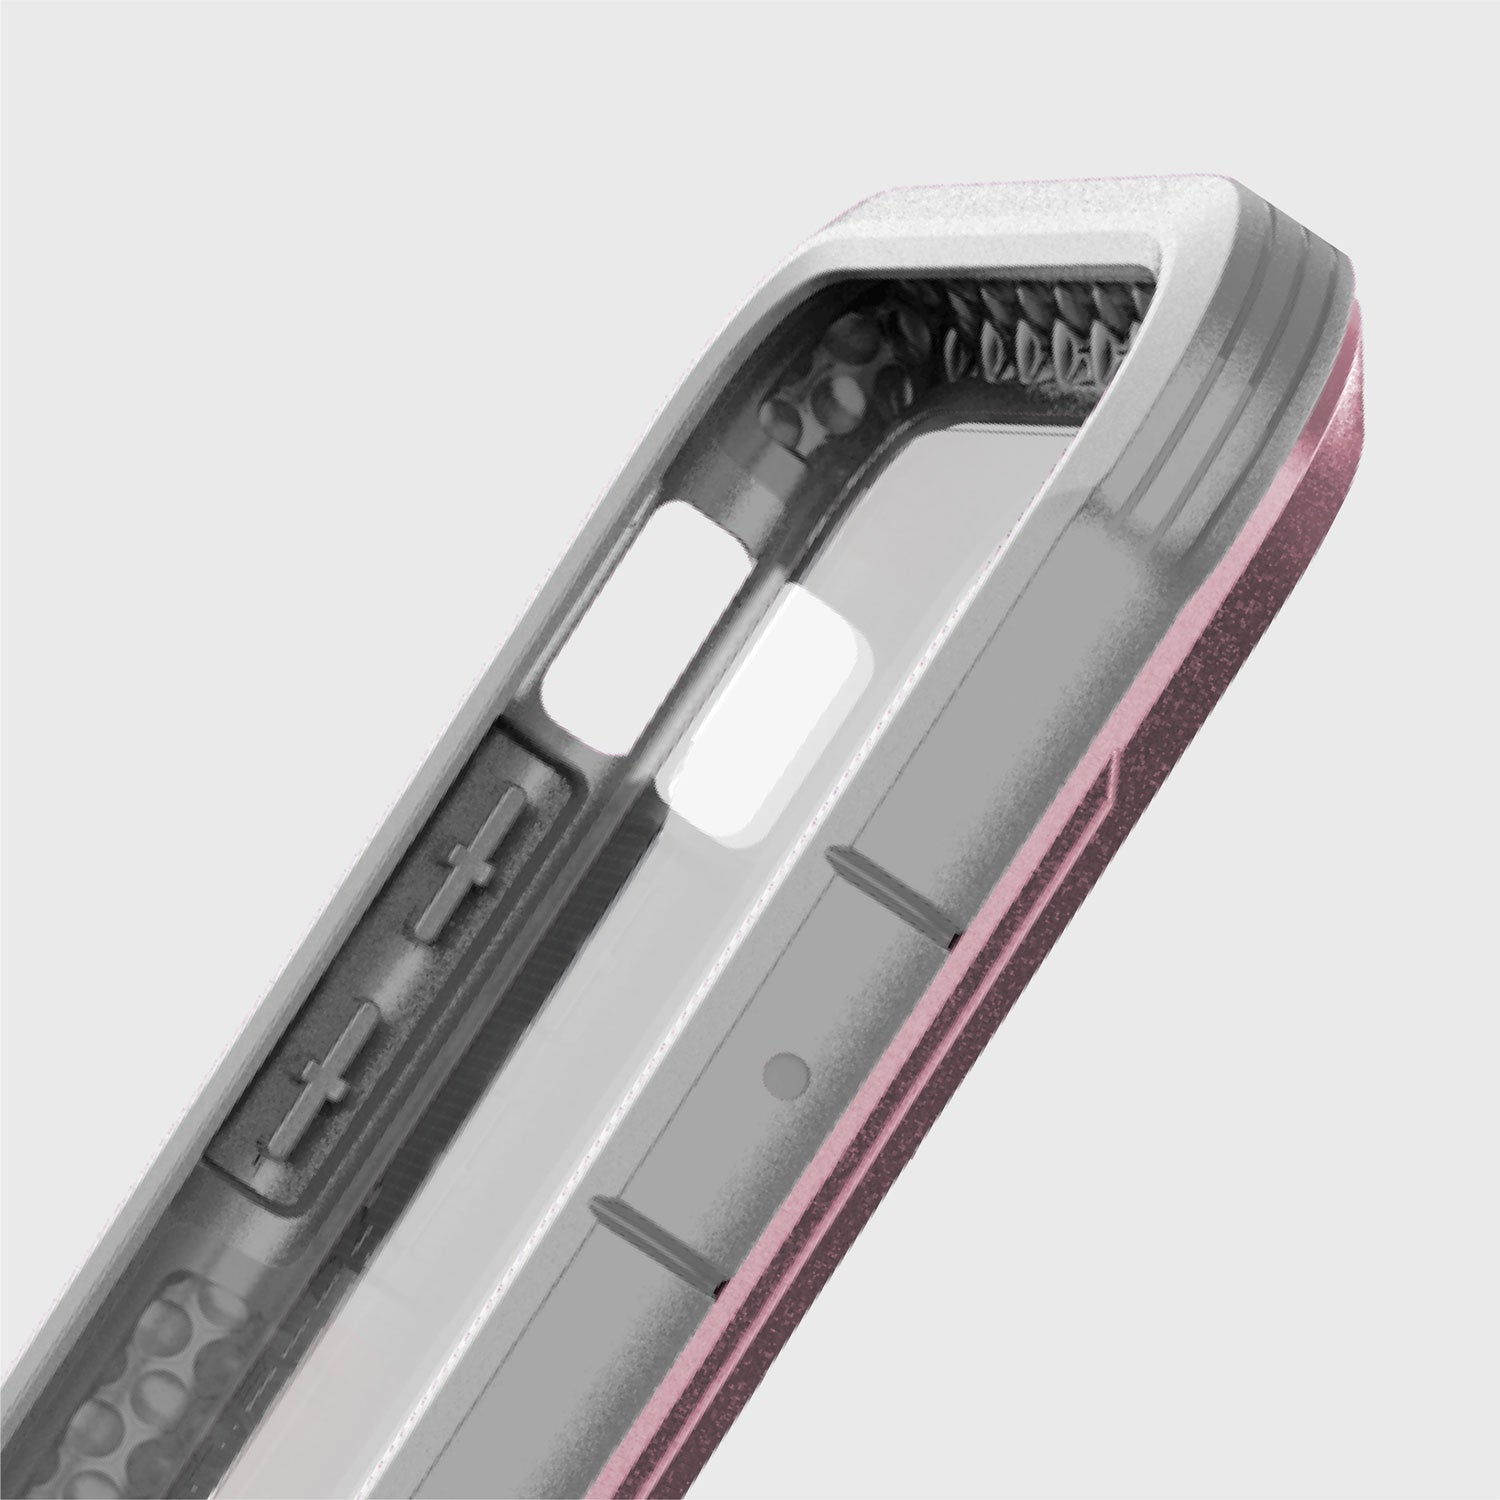 Raptic SHIELD case for iPhone XS Max offering drop protection in pink and grey.